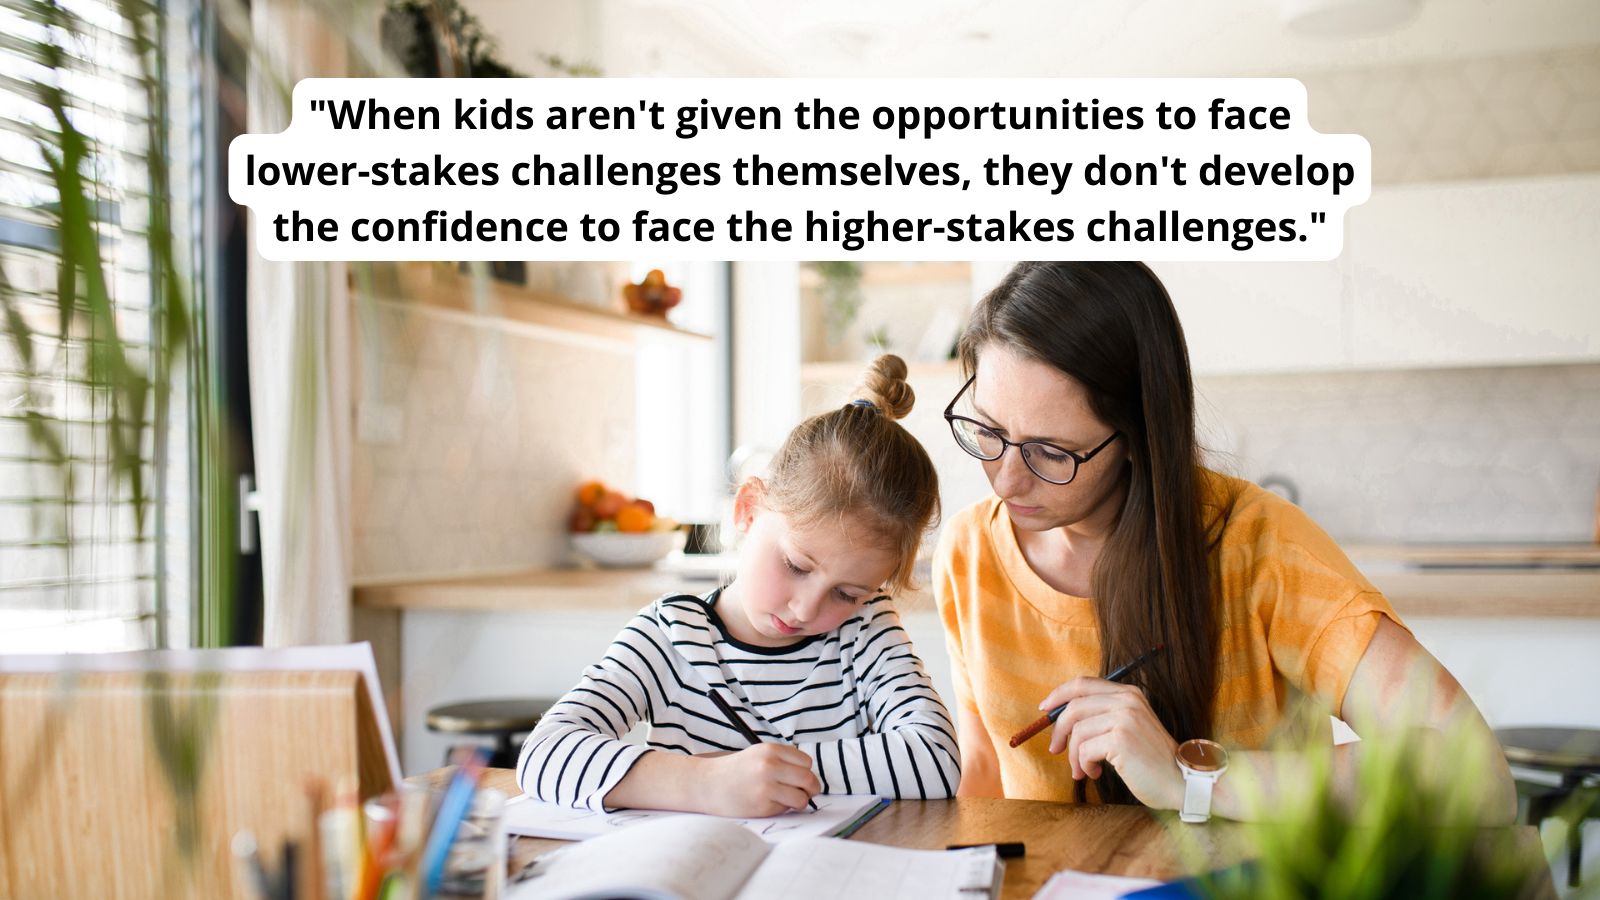 Photo of parent working with child and quote about whether advocating hurts opportunities to build student resilience